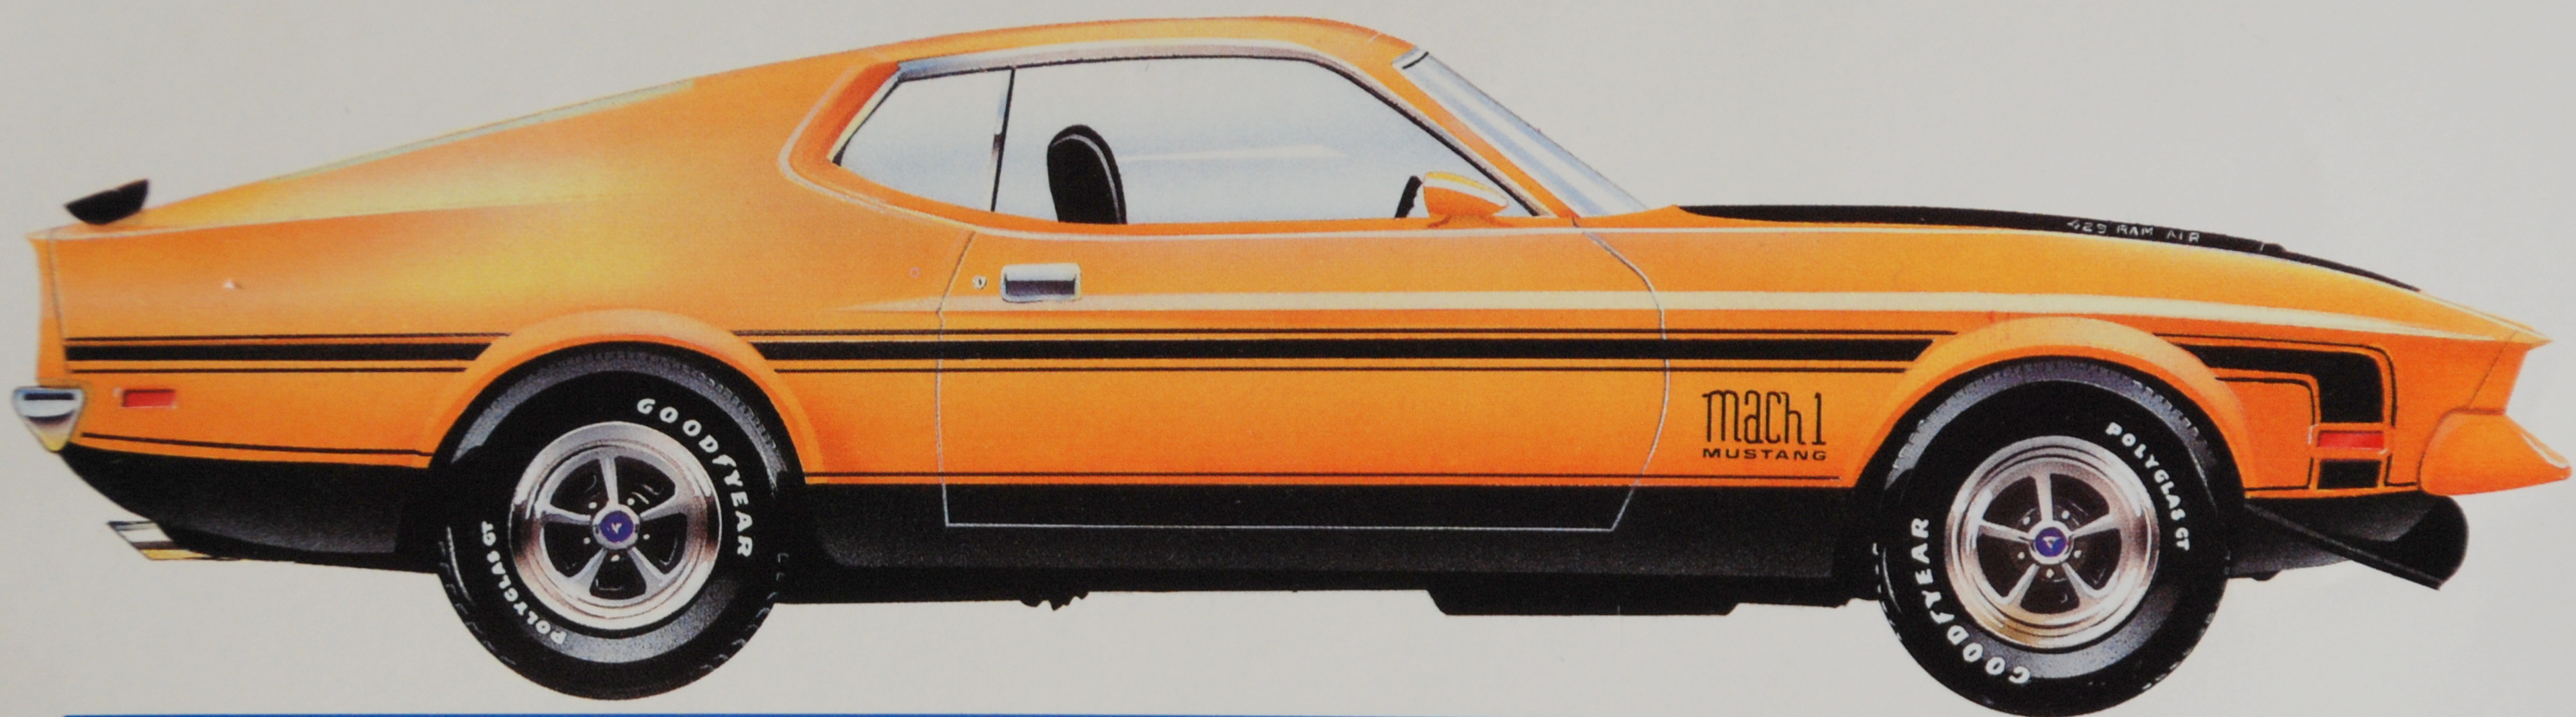 1/64 '71 Mustang Mach 1 Stripes Decal SCR-0889 